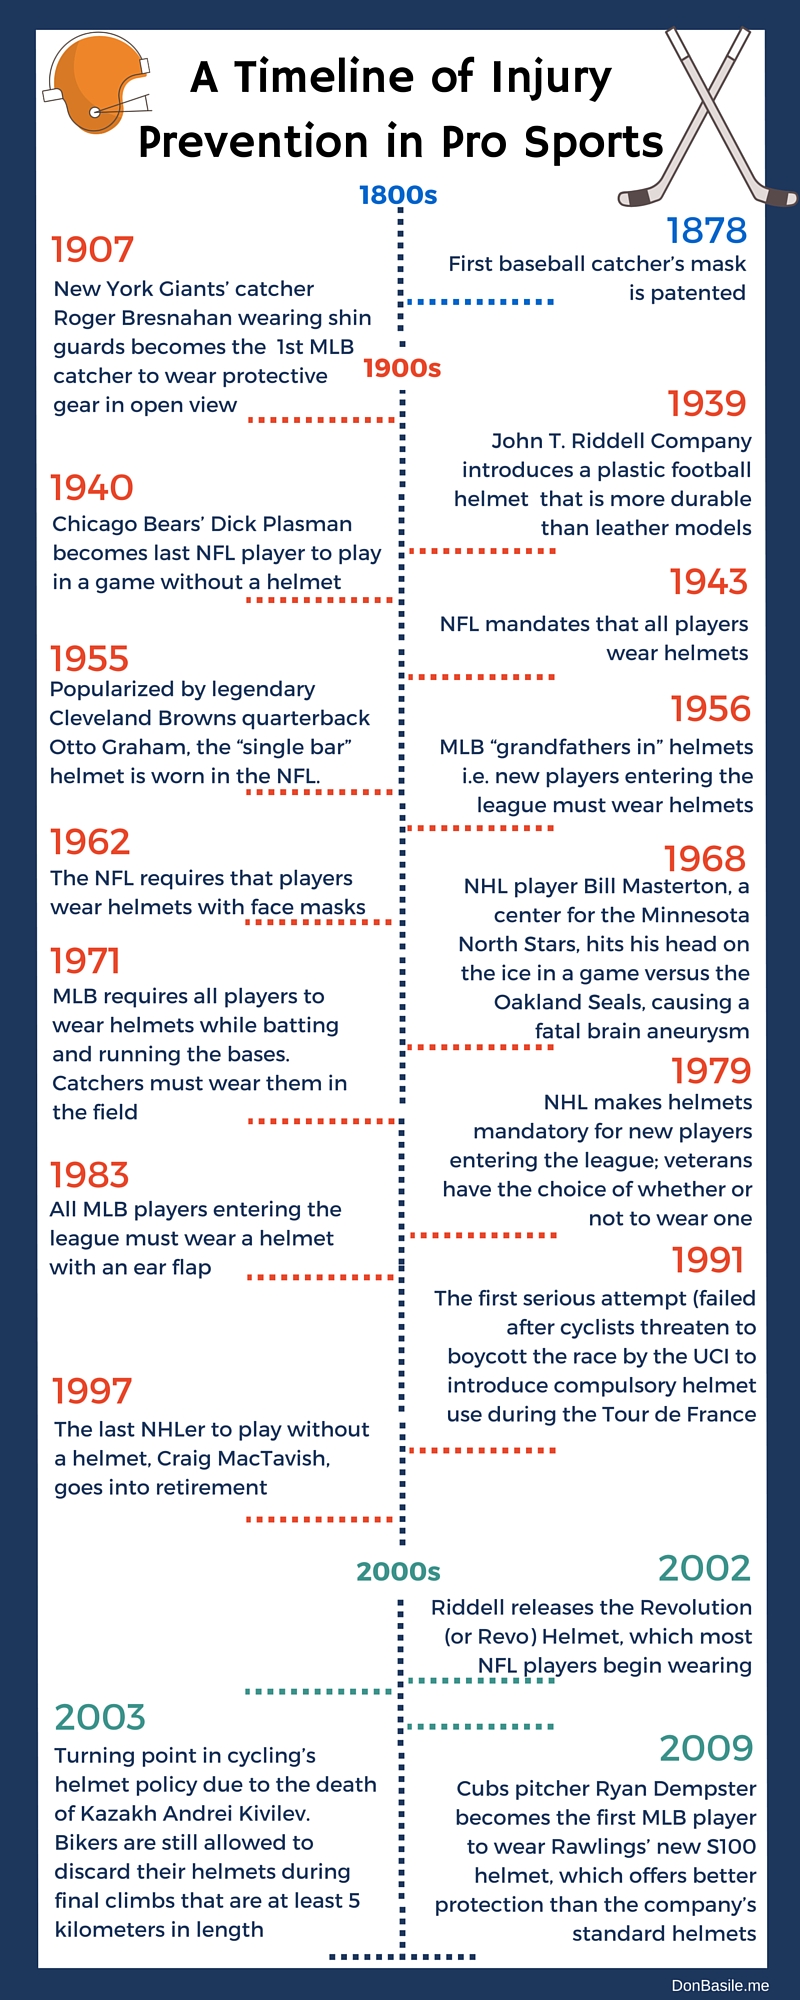 A Timeline of Injury Prevention in Pro Sports